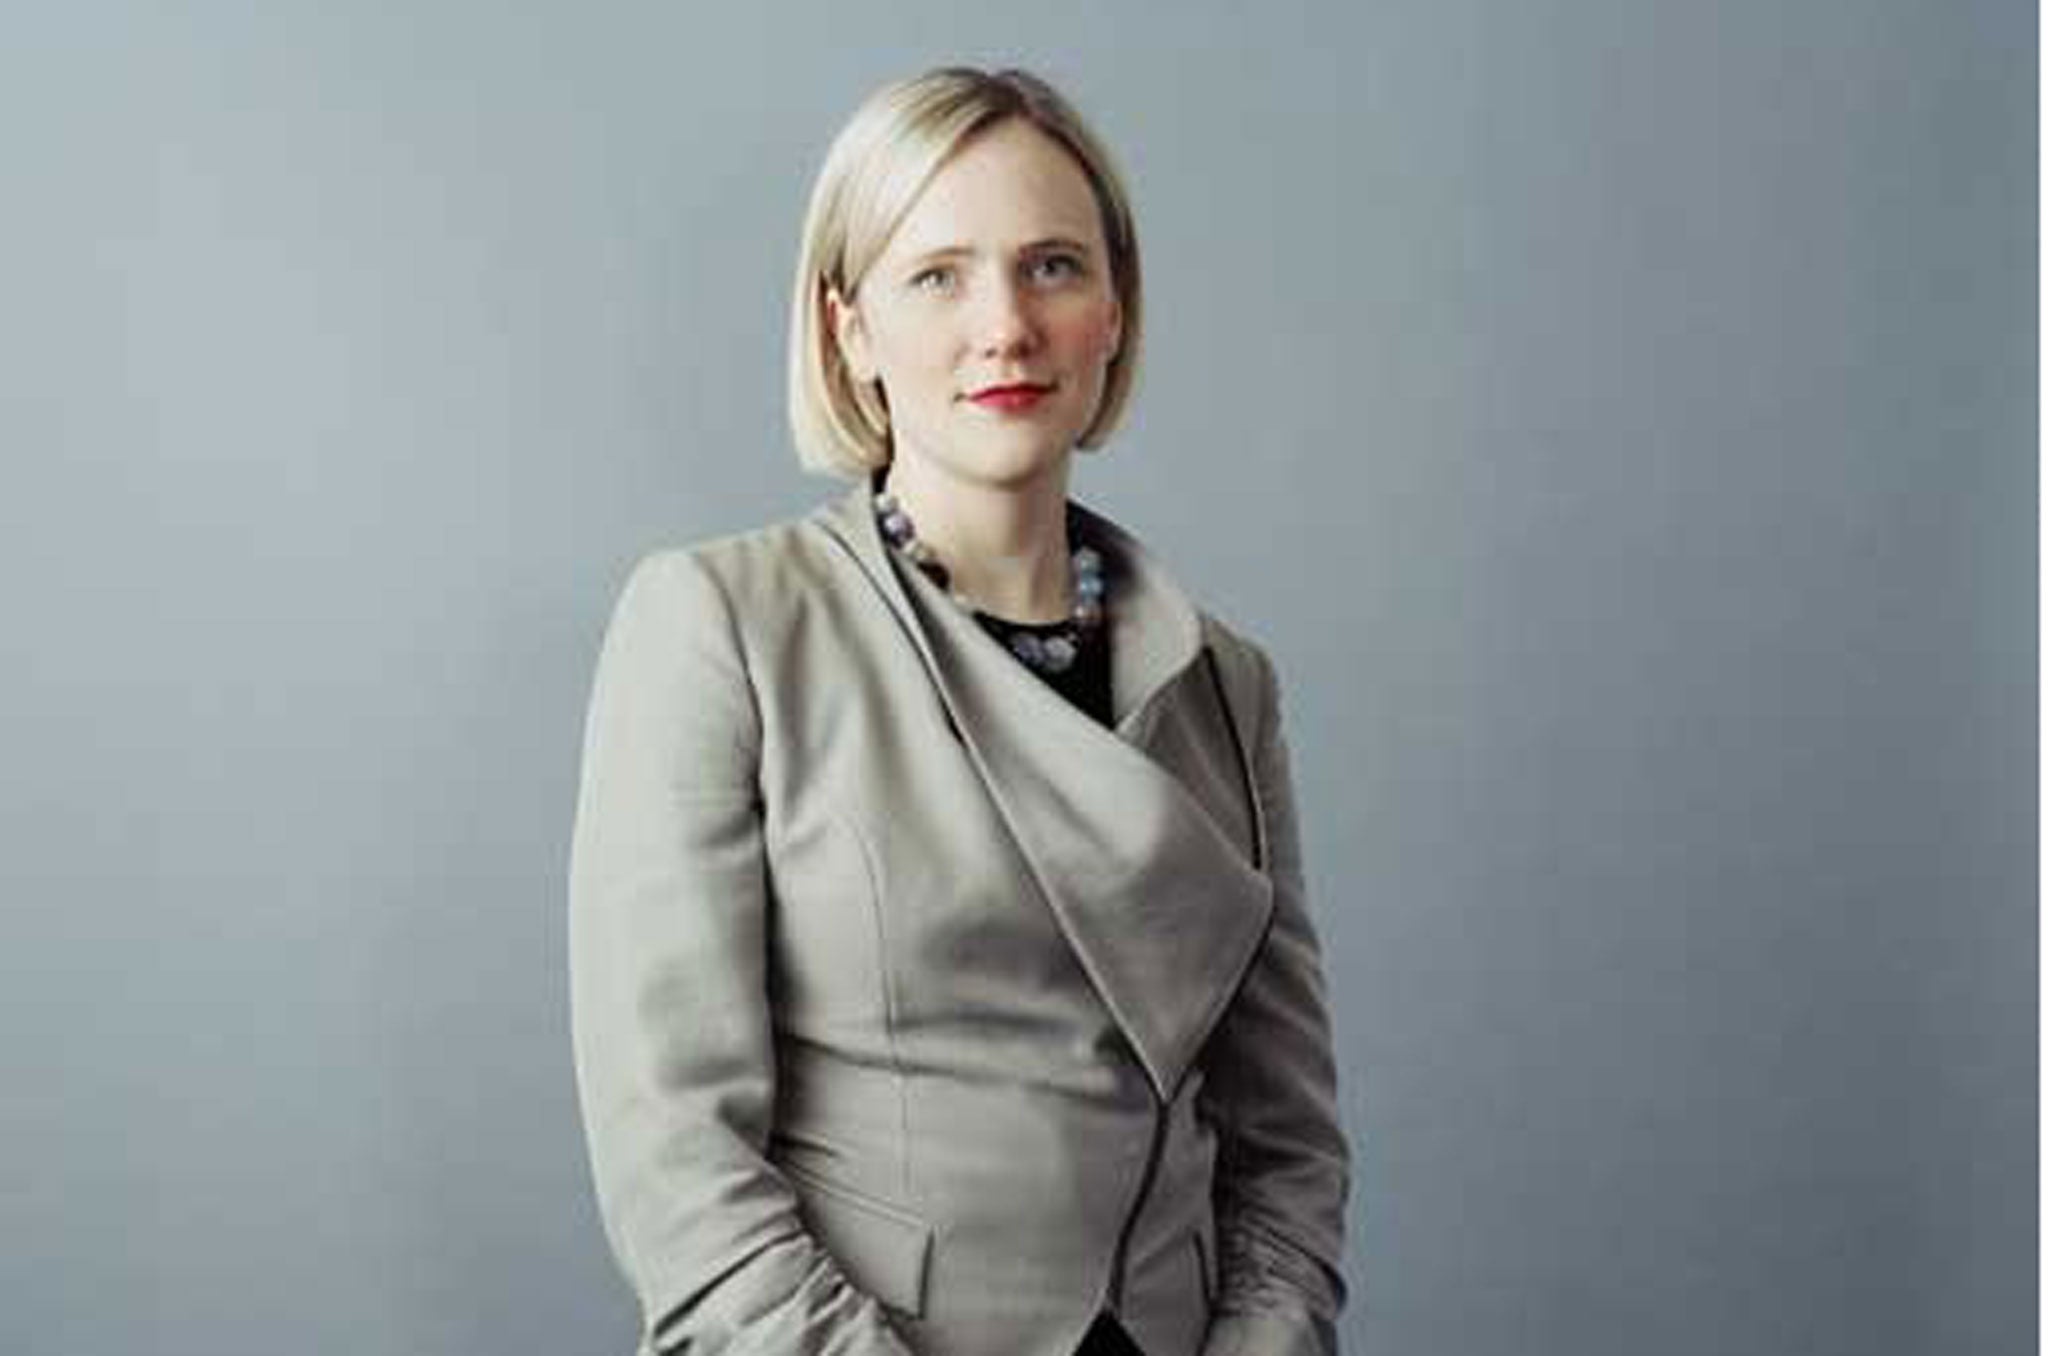 Stella Creasy, Labour MP for Walthamstow is seen as a rising star in her party. Does she have what it takes to be Britain's next female prime minister?